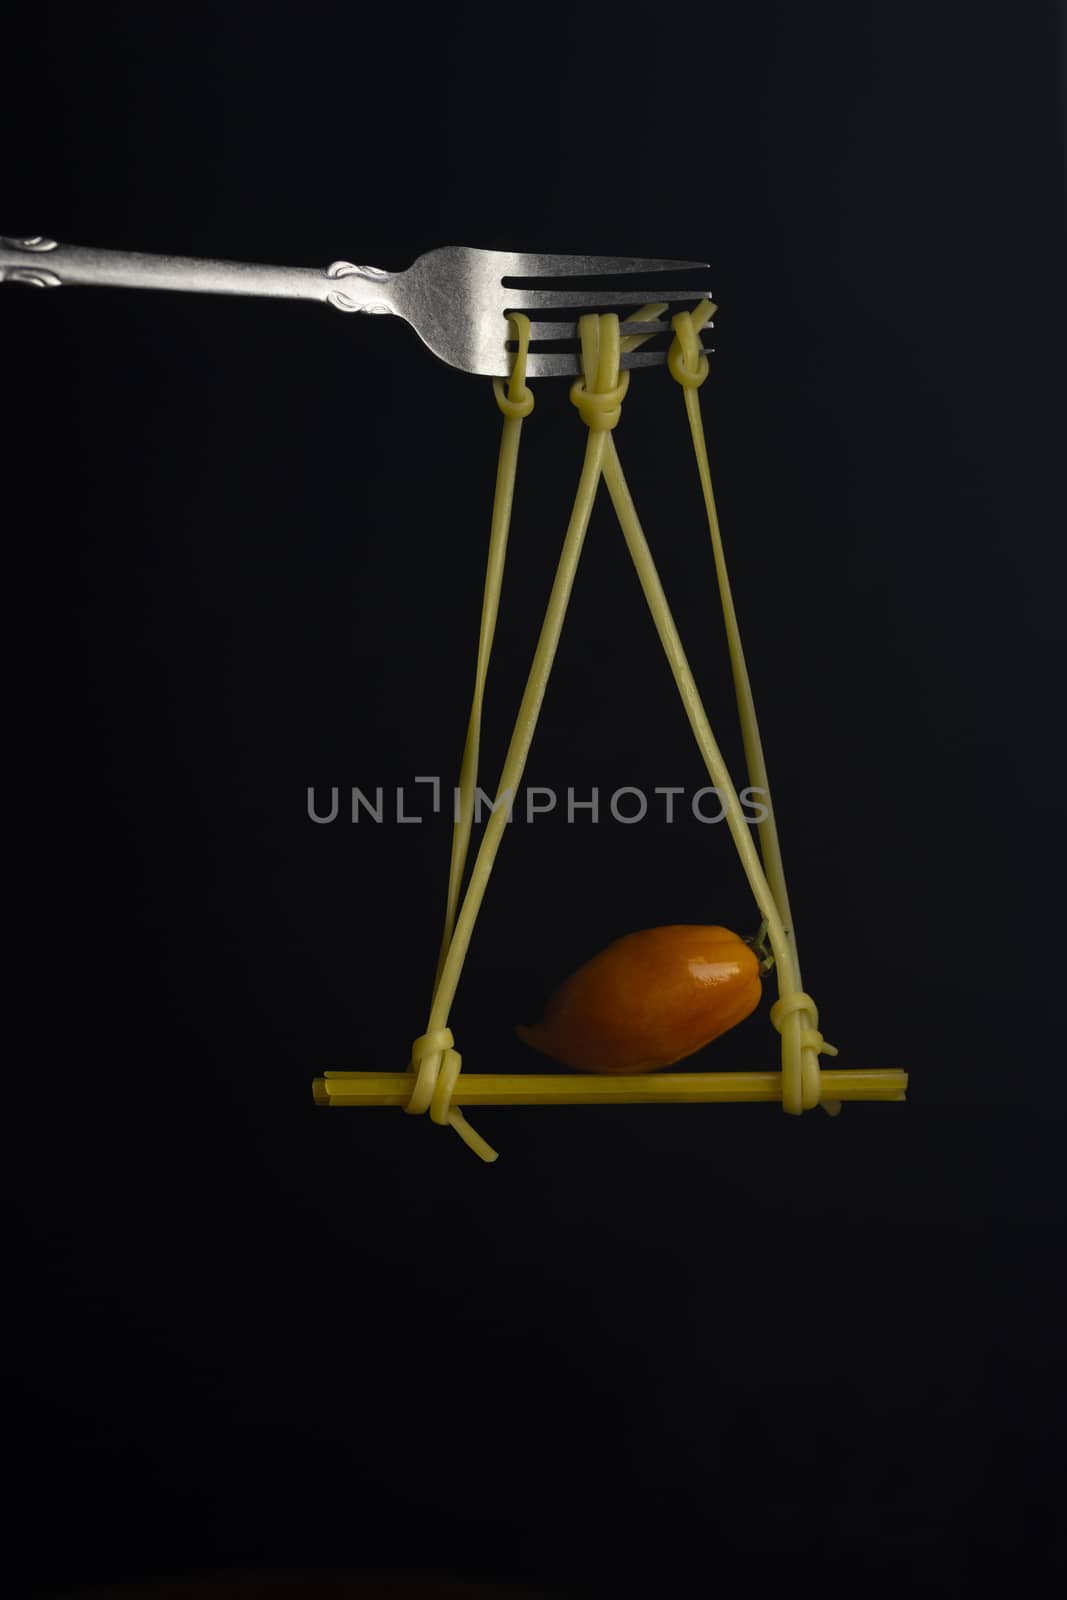 Spaghetti on a fork in front of black background. Swing from spaghetti.